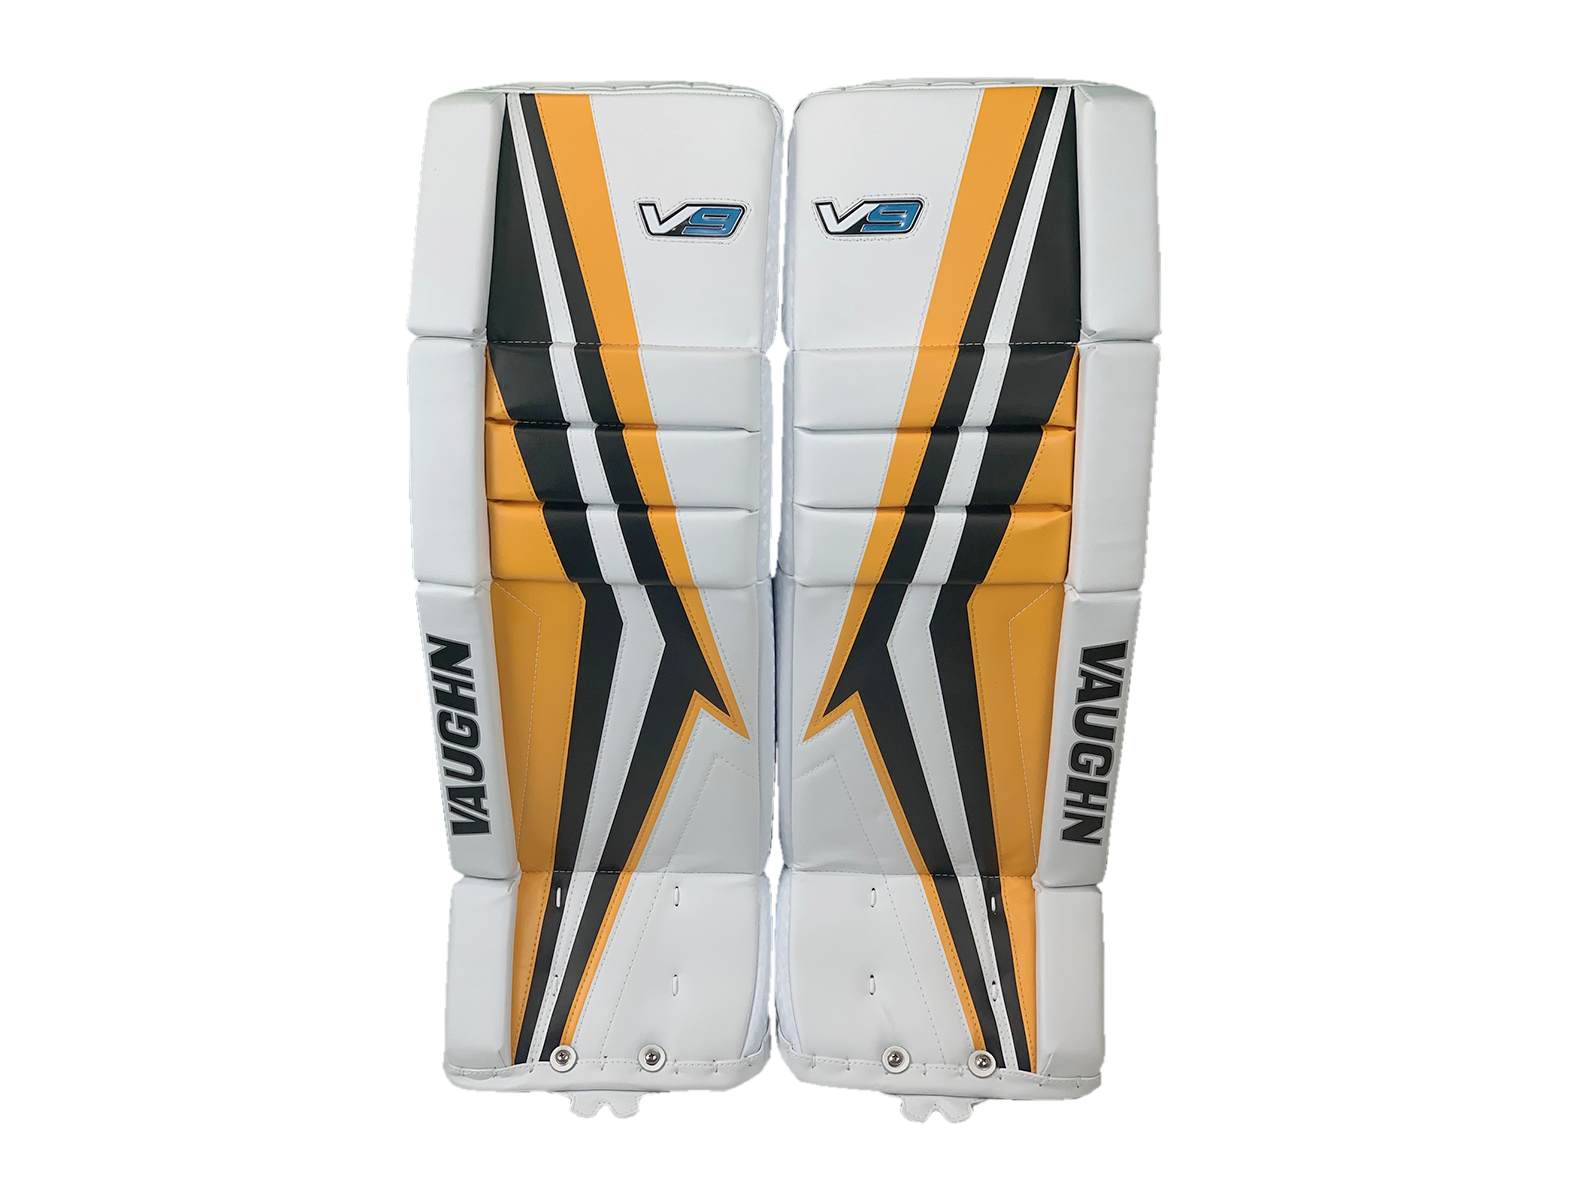 Vaughn V9 full set - initial impressions and long-term review